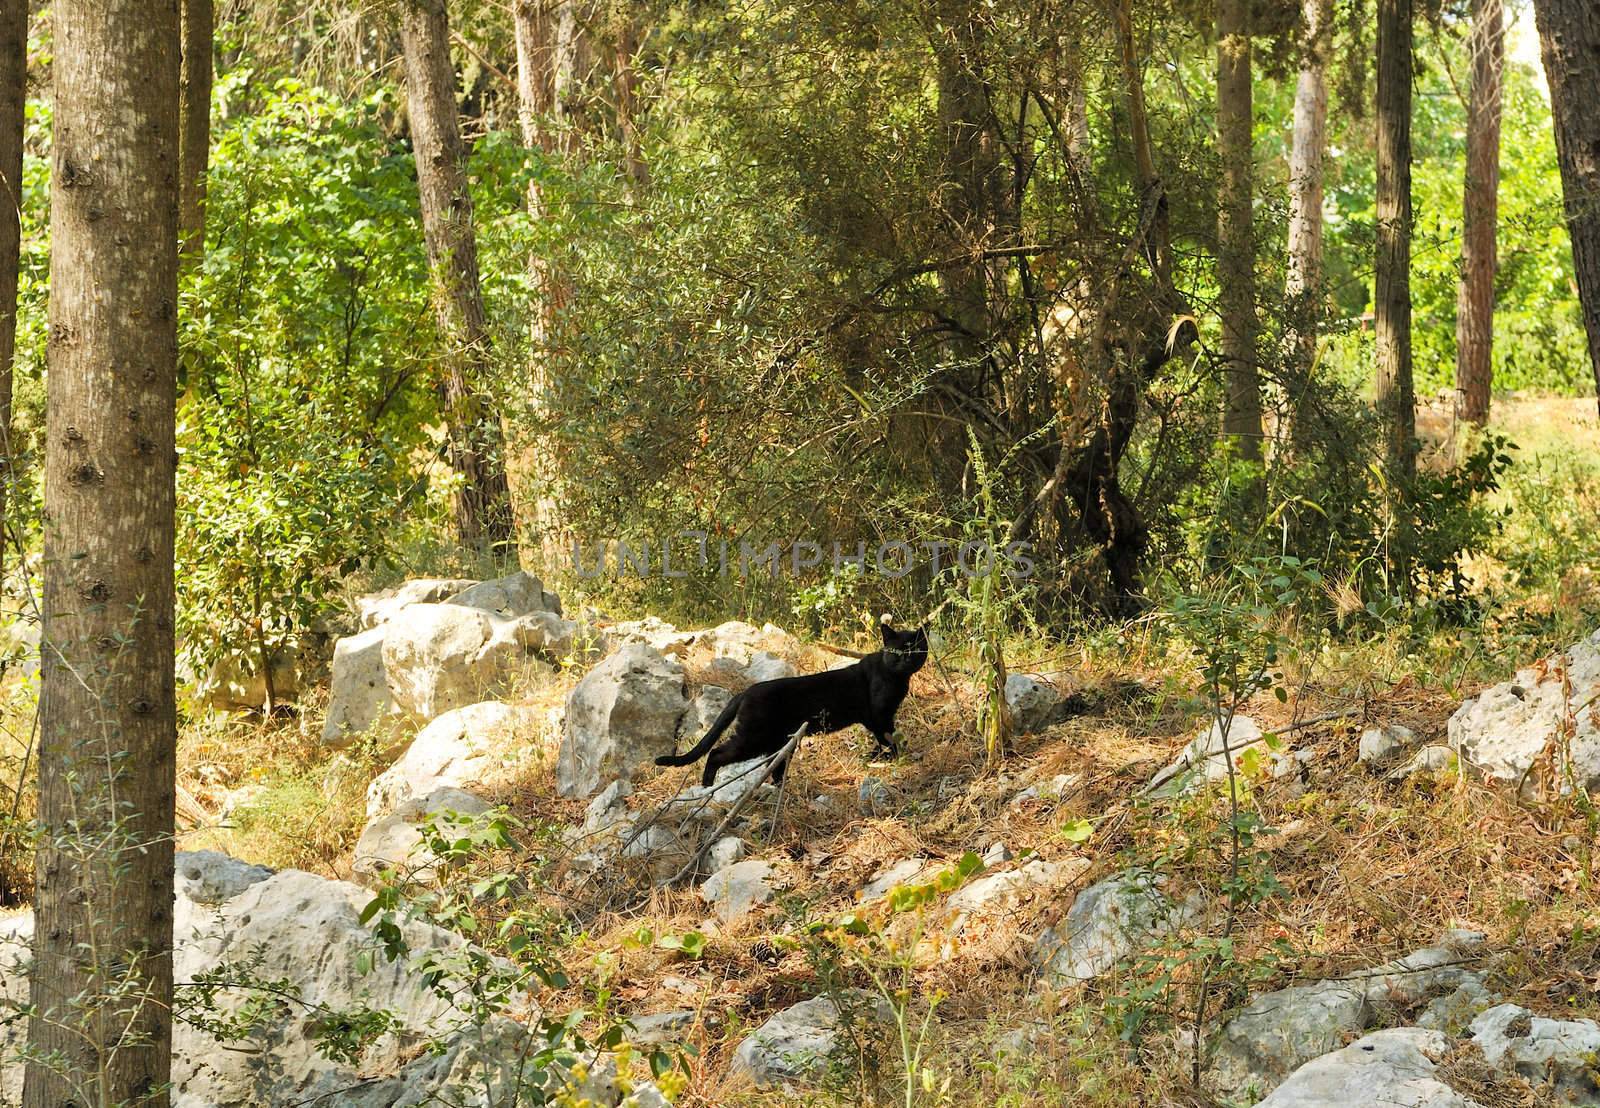 The black cat goes to wood on hunting